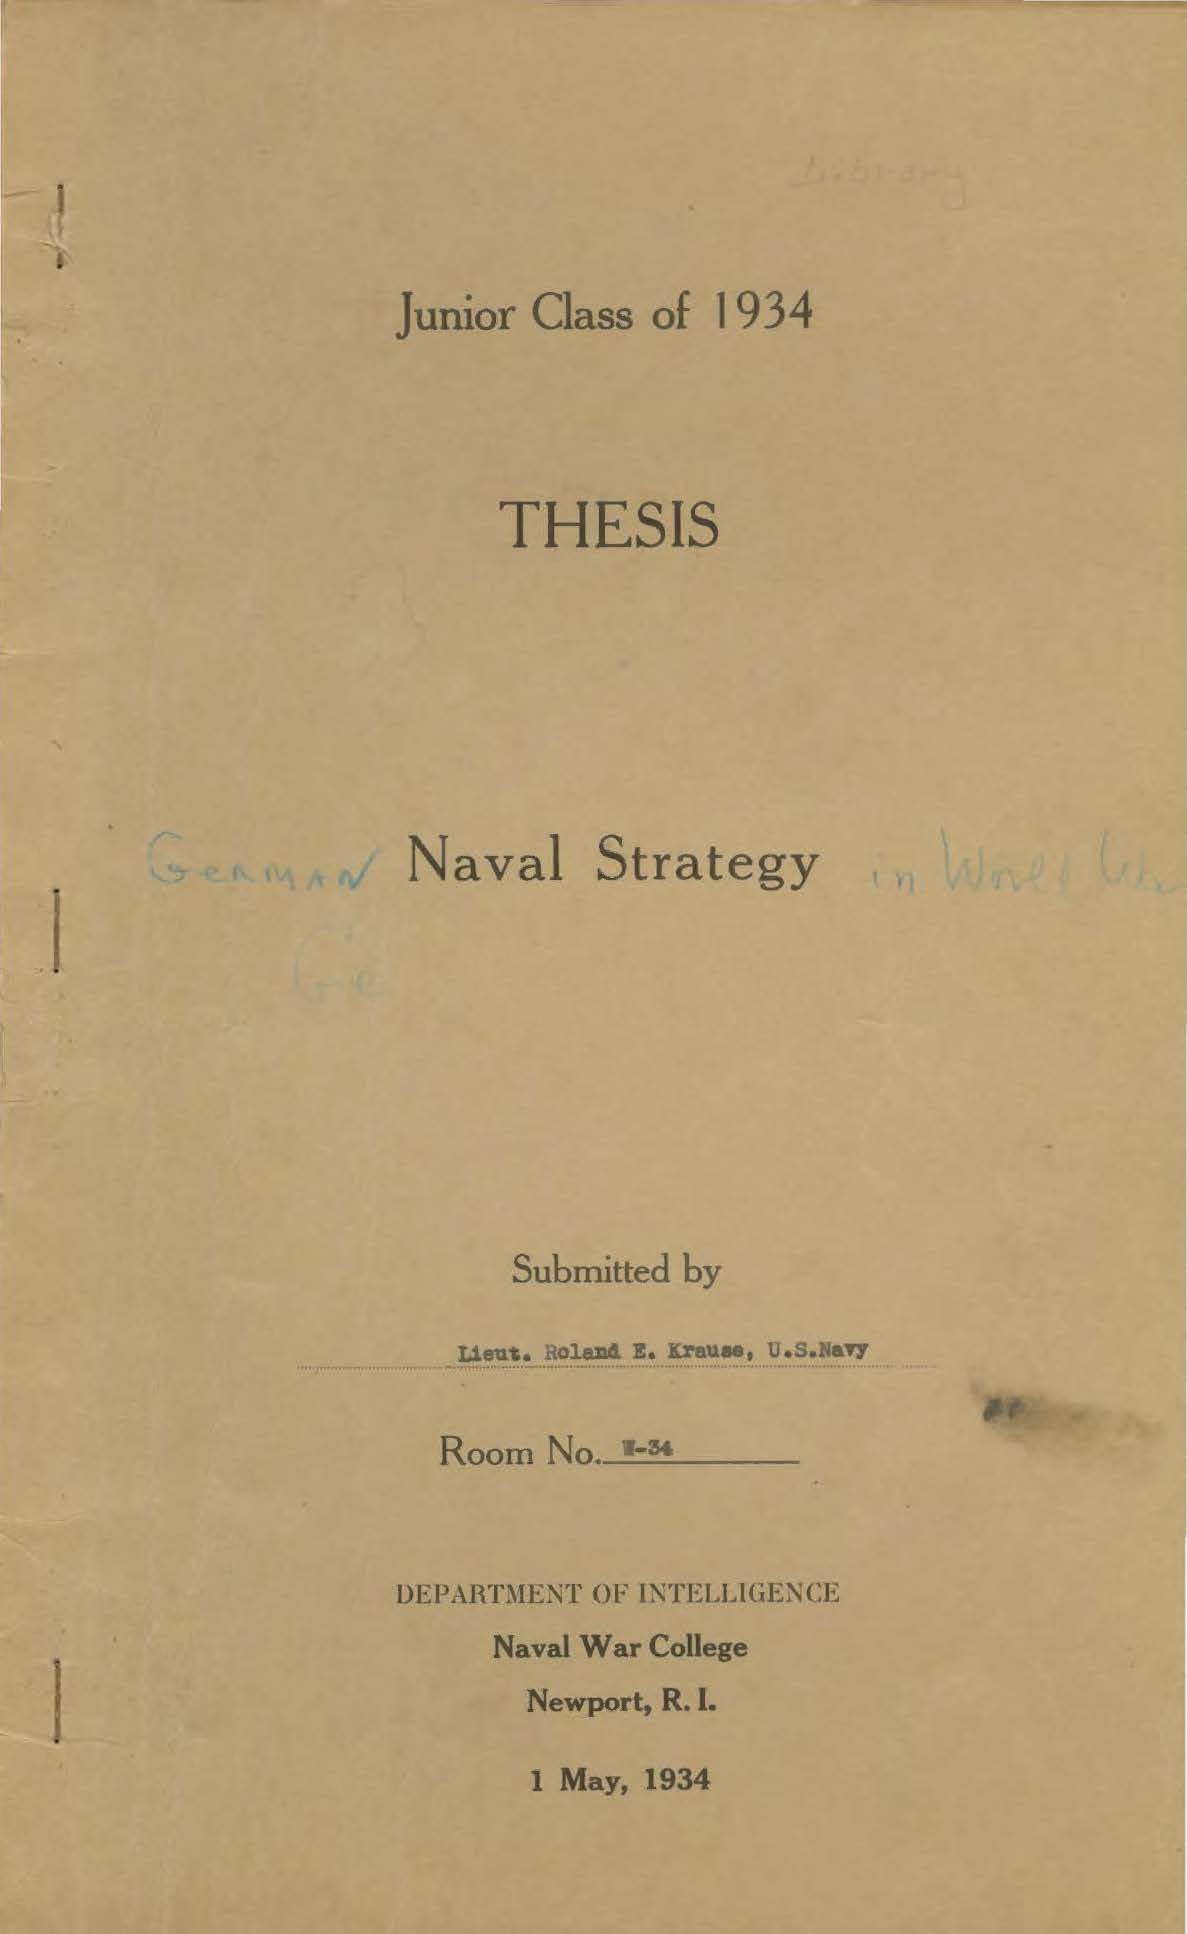 German Naval Strategy in the World War [WWI], Roland E. Krause